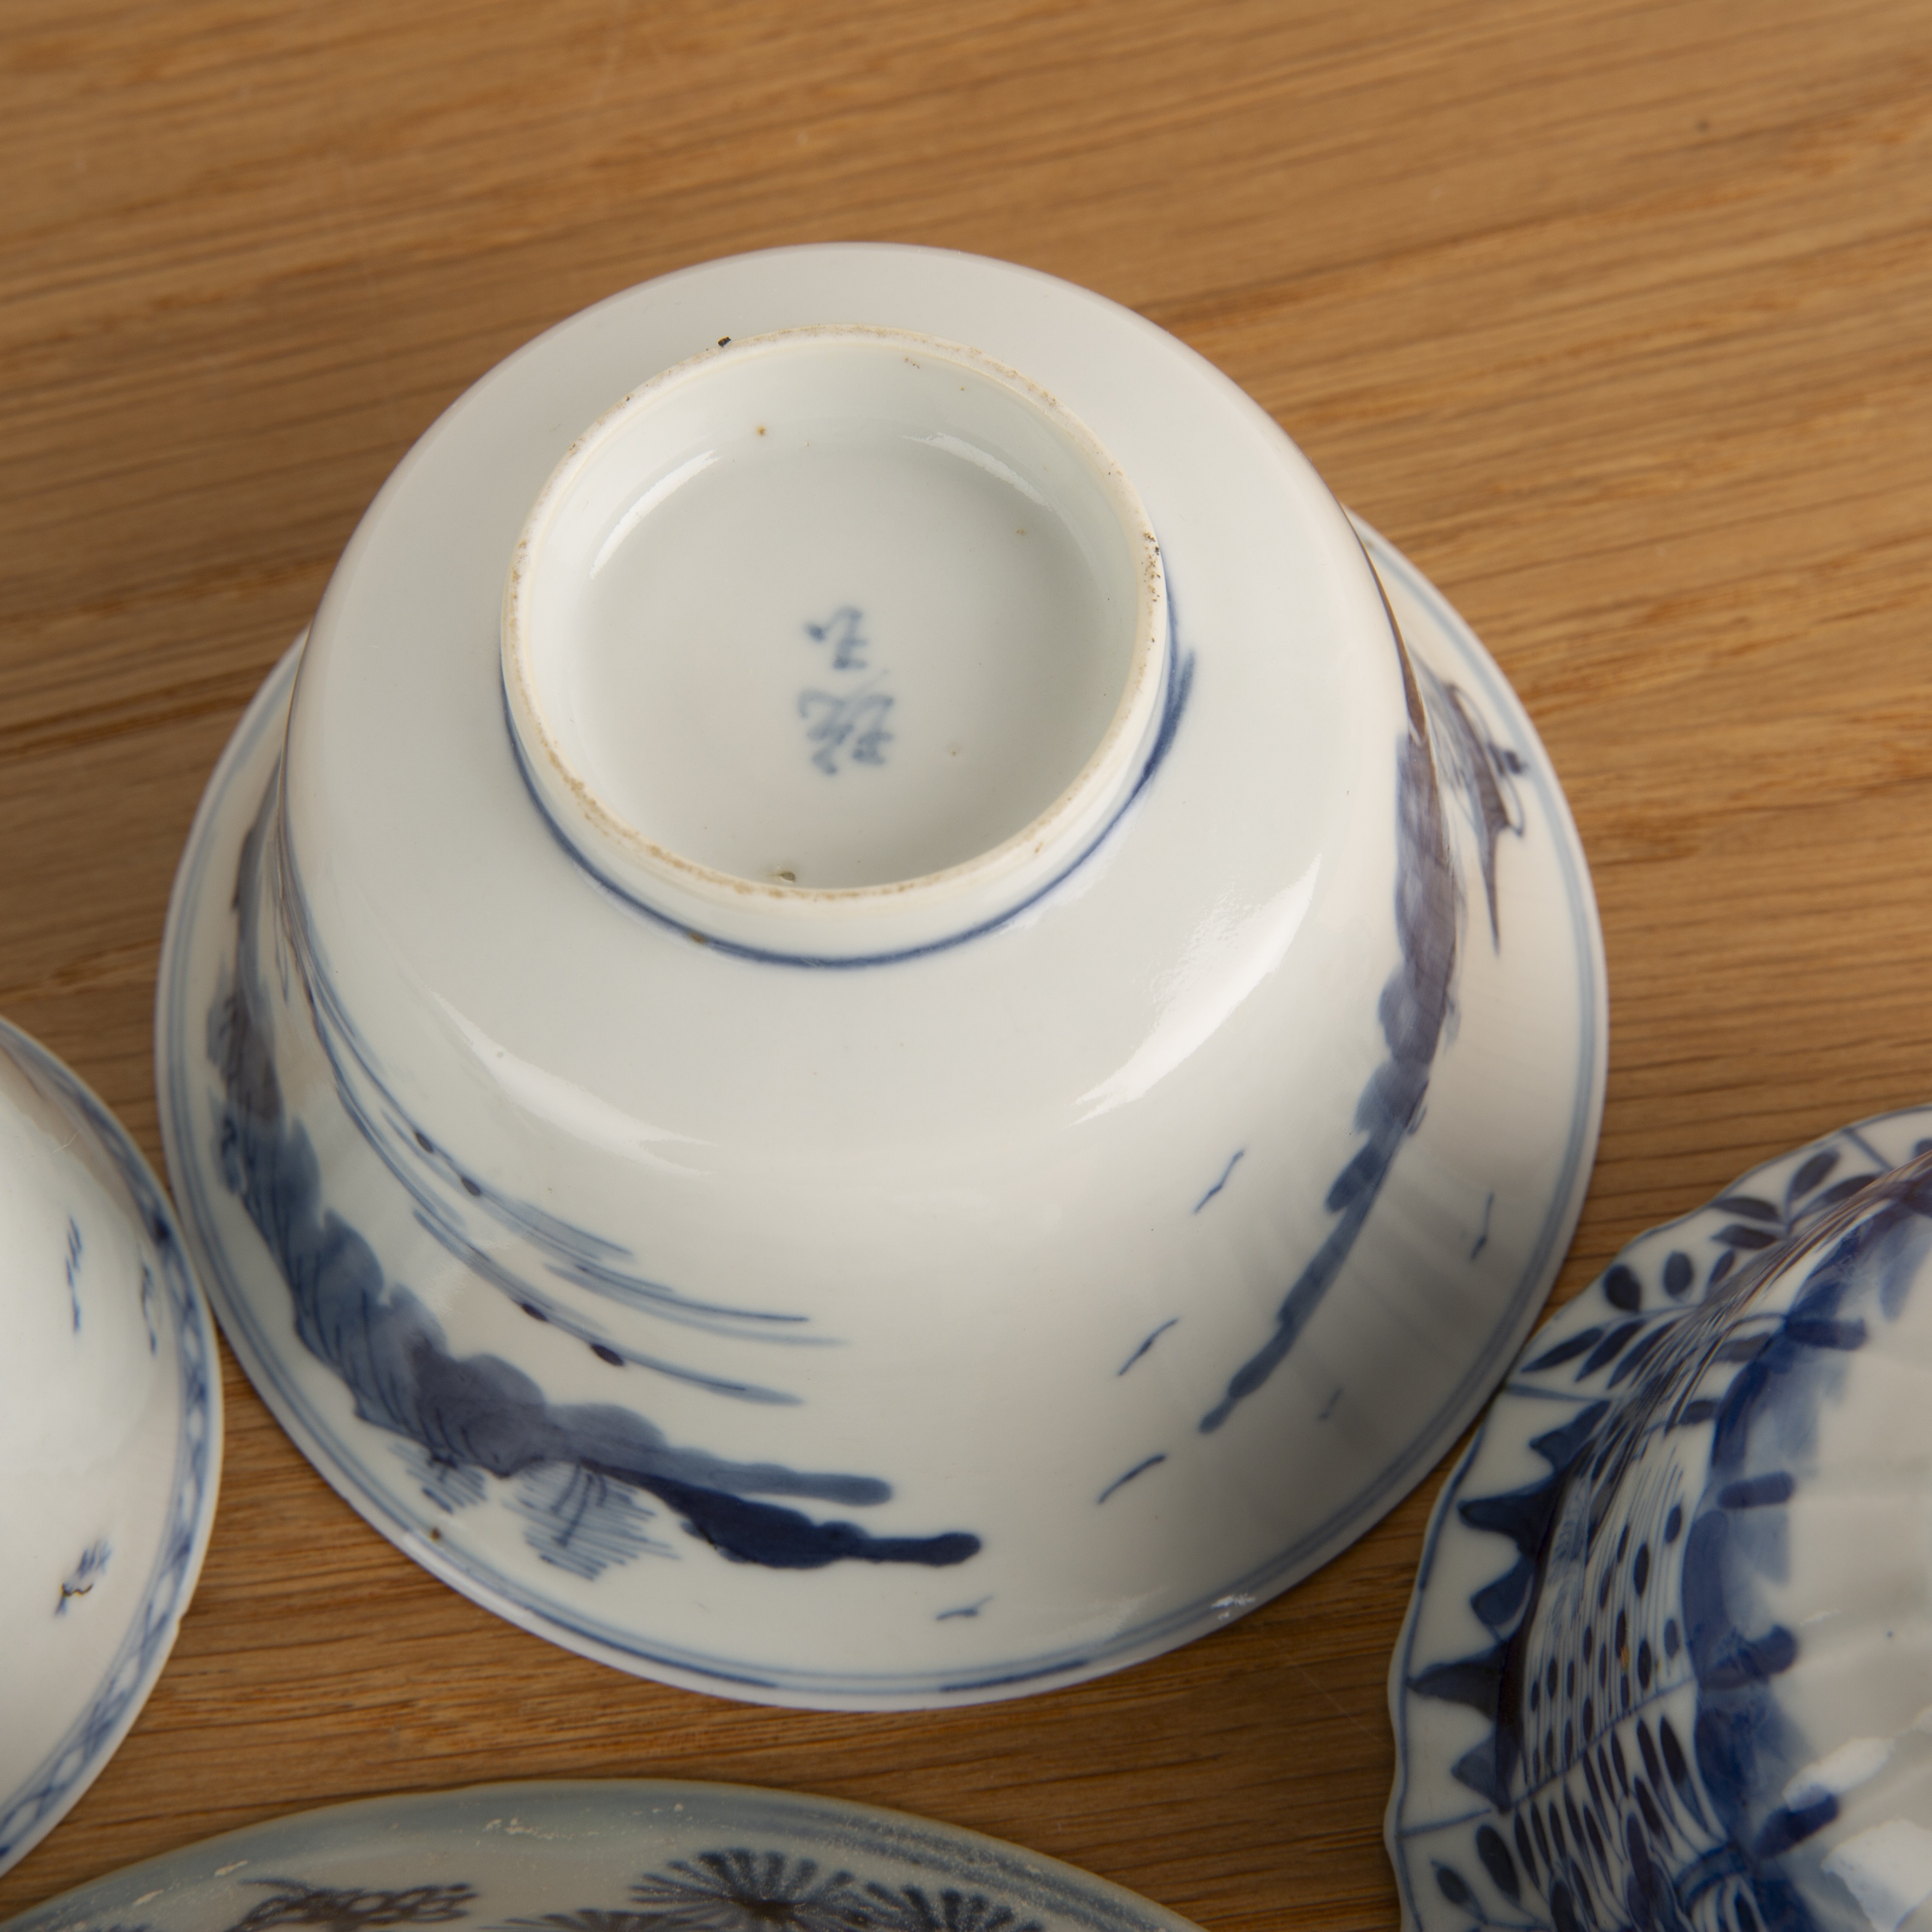 Group of blue and white porcelain Chinese and Japanese to include a tea bowl and saucer, painted - Image 5 of 6